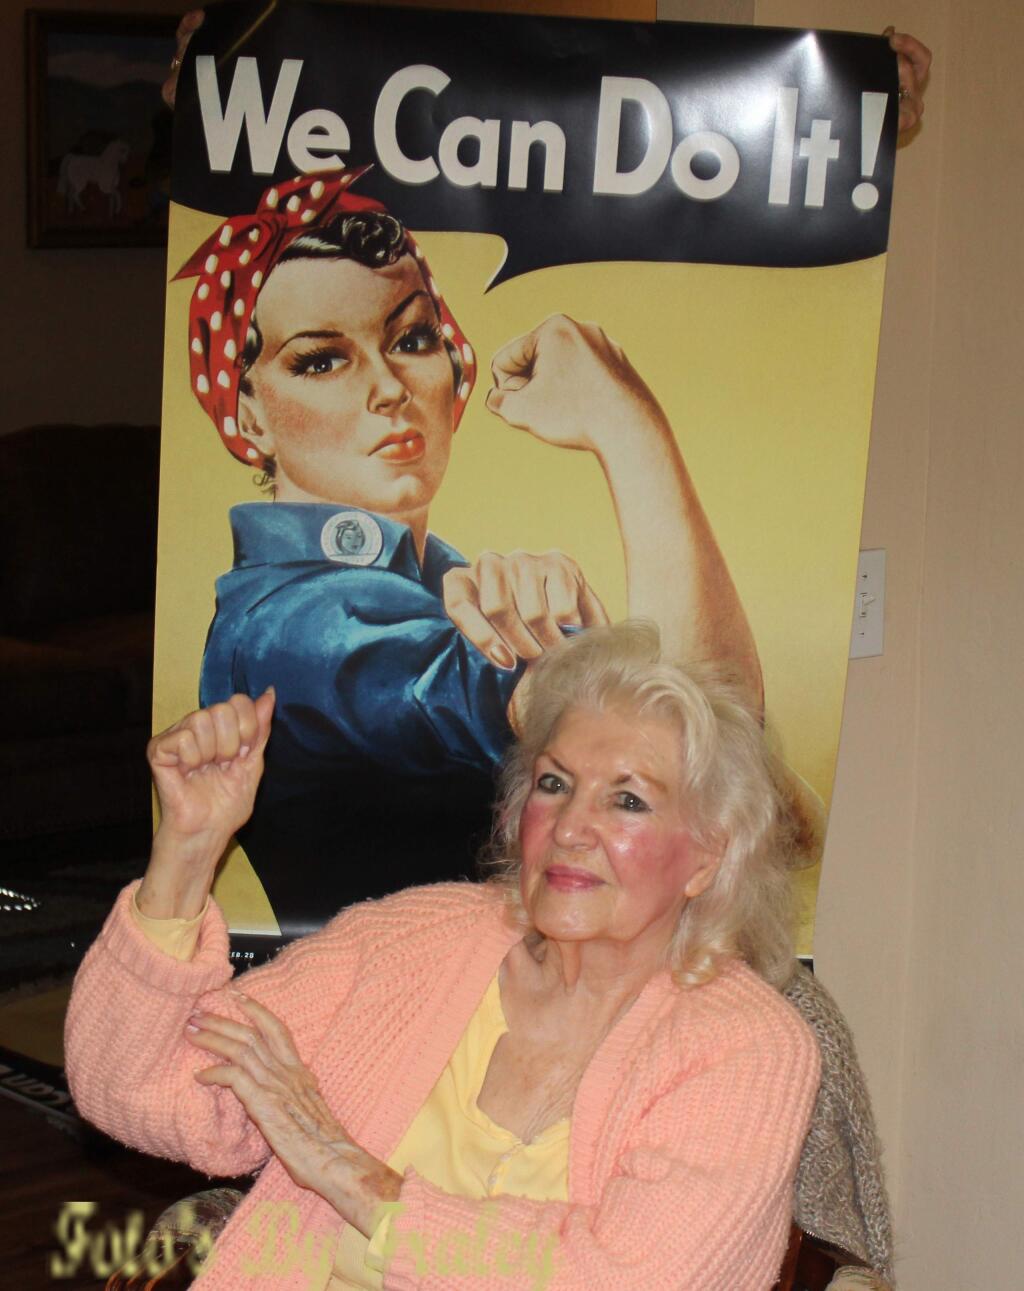 In a photo provided by John D. Fraley, Naomi Parker Fraley in 2015 with the Rosie the Riveter poster that became a feminist touchstone. Fraley, who died on Jan. 20, 2018, at age 96 in Longview, Wash., went unsung for seven decades before being identified as the real Rosie the Riveter – the female war worker of 1940s popular culture who became a feminist touchstone in the late 20th century. (John D. Fraley via The New York Times) -- NO SALES; FOR EDITORIAL USE ONLY WITH NYT STORY OBIT FRALEY BY MARGALIT FOX FOR JAN. 22, 2018. ALL OTHER USE PROHIBITED. --